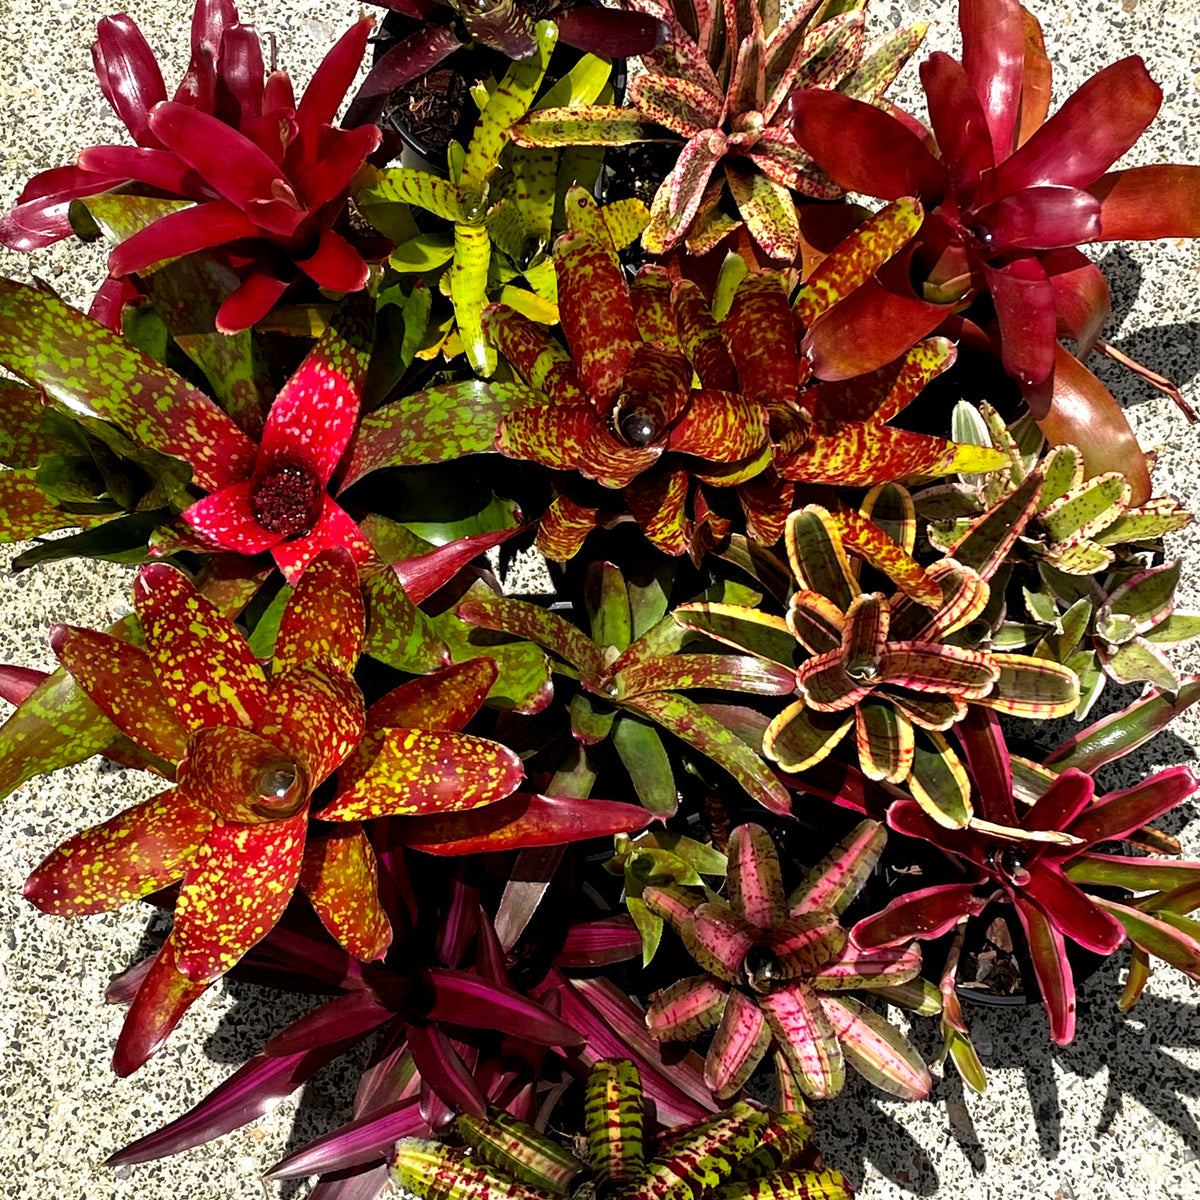 Are you a Bromeliad lover? Then you'll adore our assortment of Neoregelia!